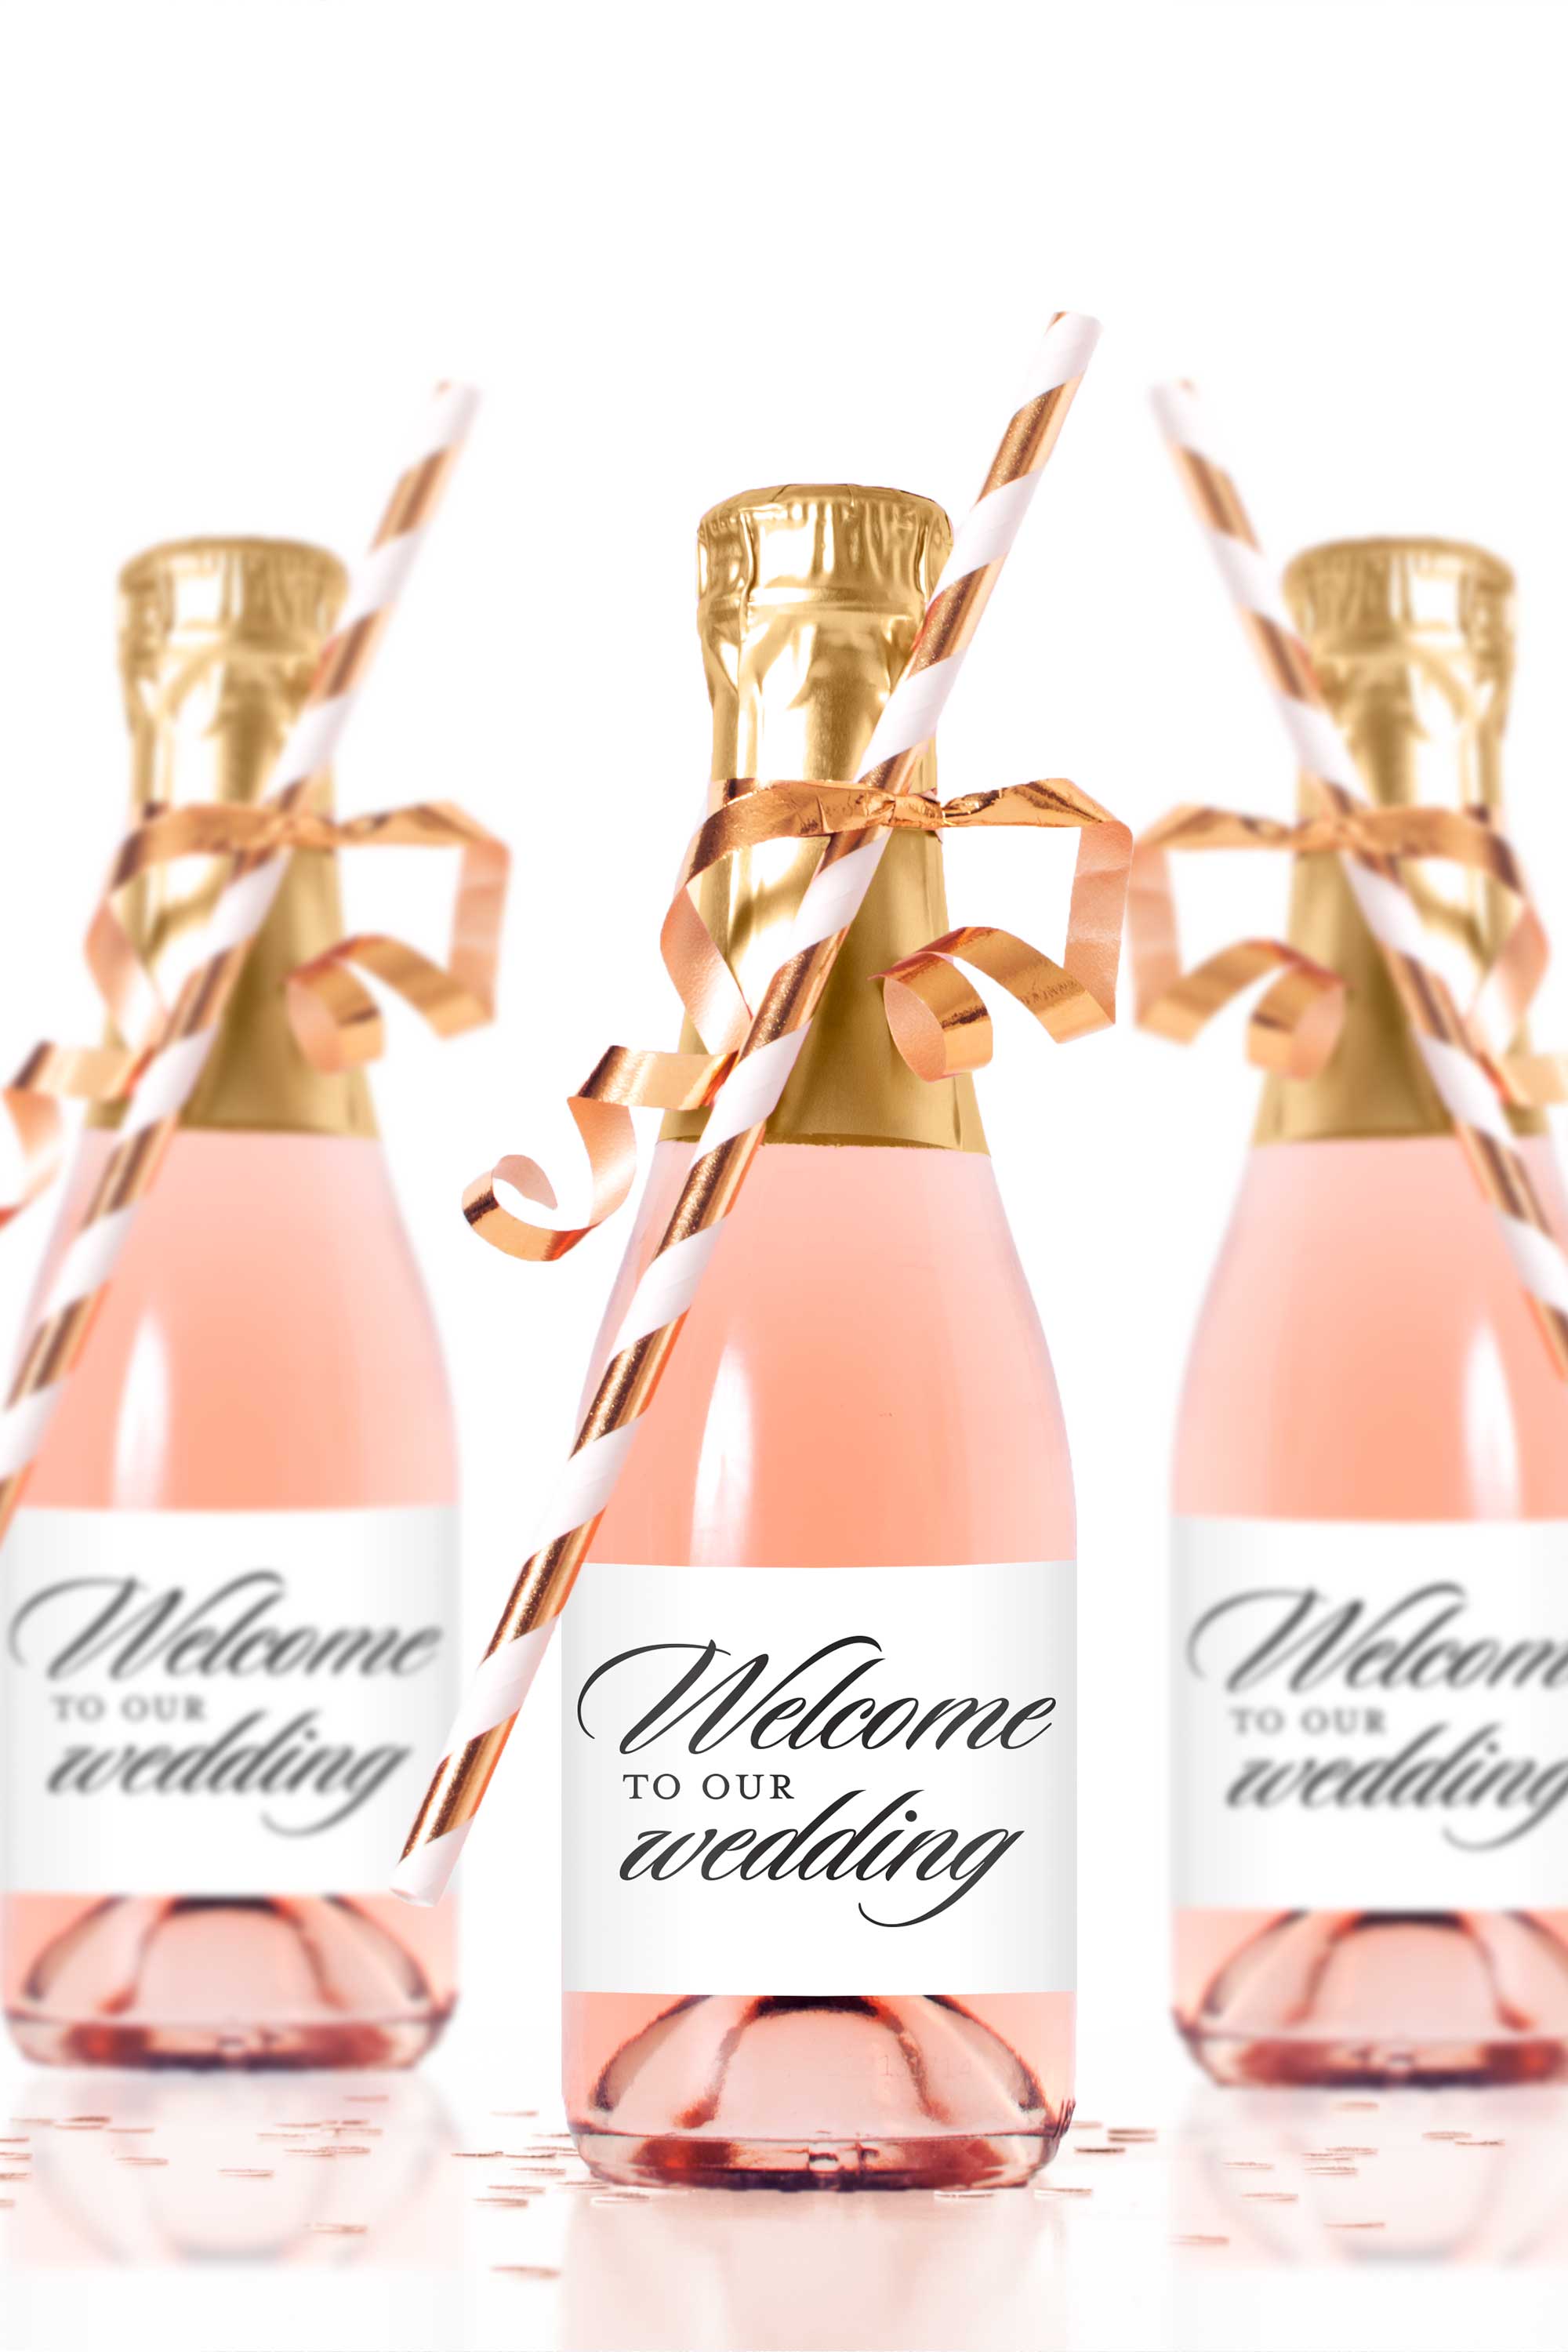 Personalized Wedding Champagne Bottle Labels – iCustomLabel